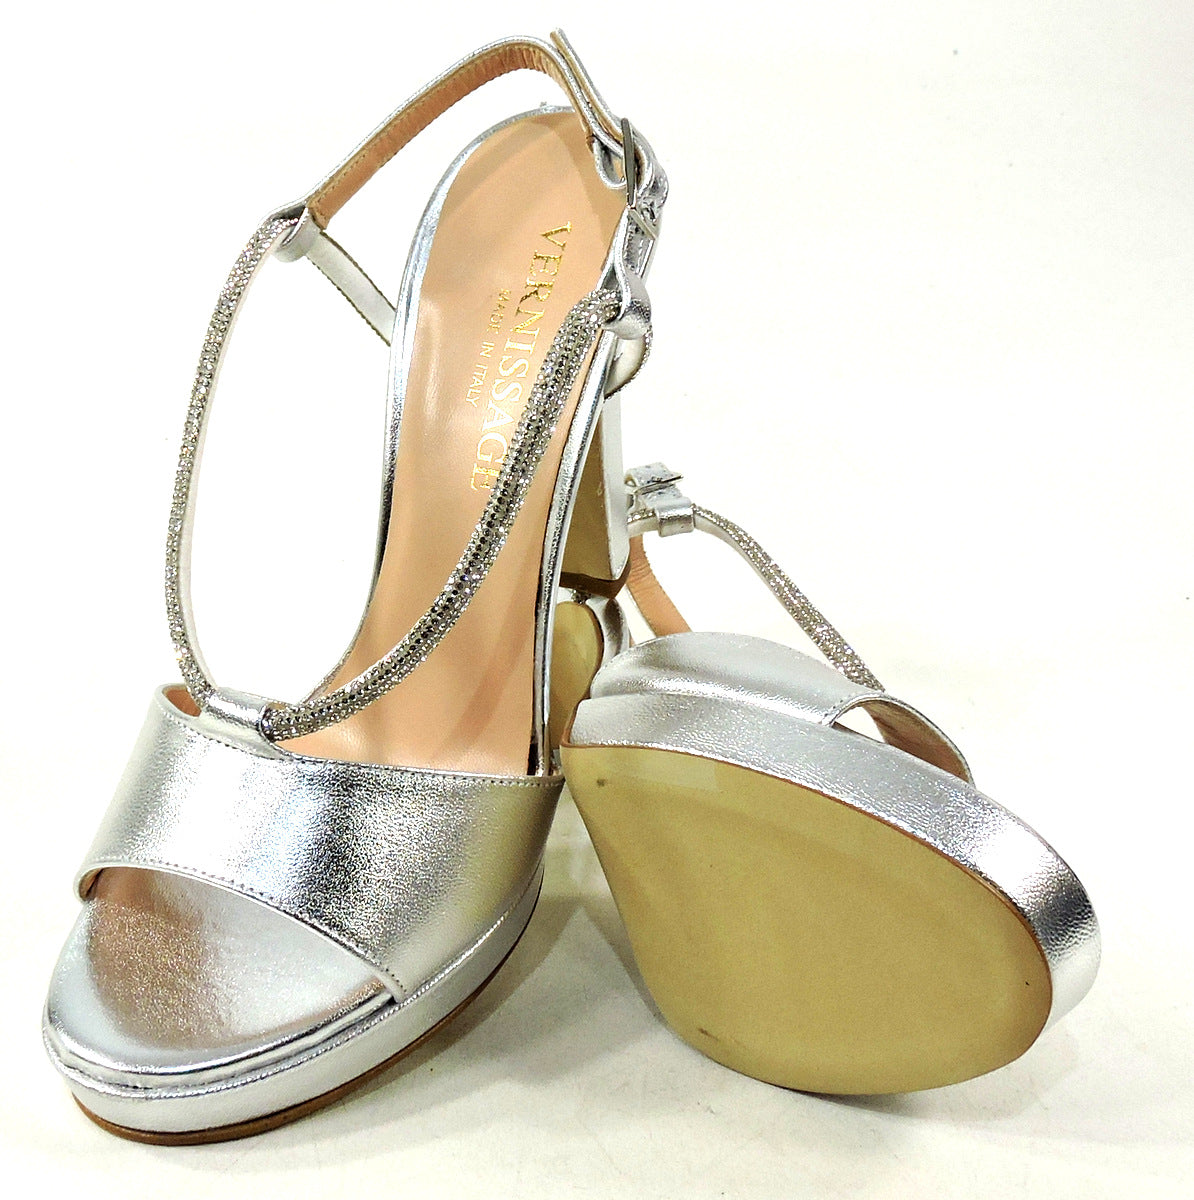 VERNISSAGE 🇮🇹 WOMEN'S SILVER LEATHER FASHION HEELED SANDALS